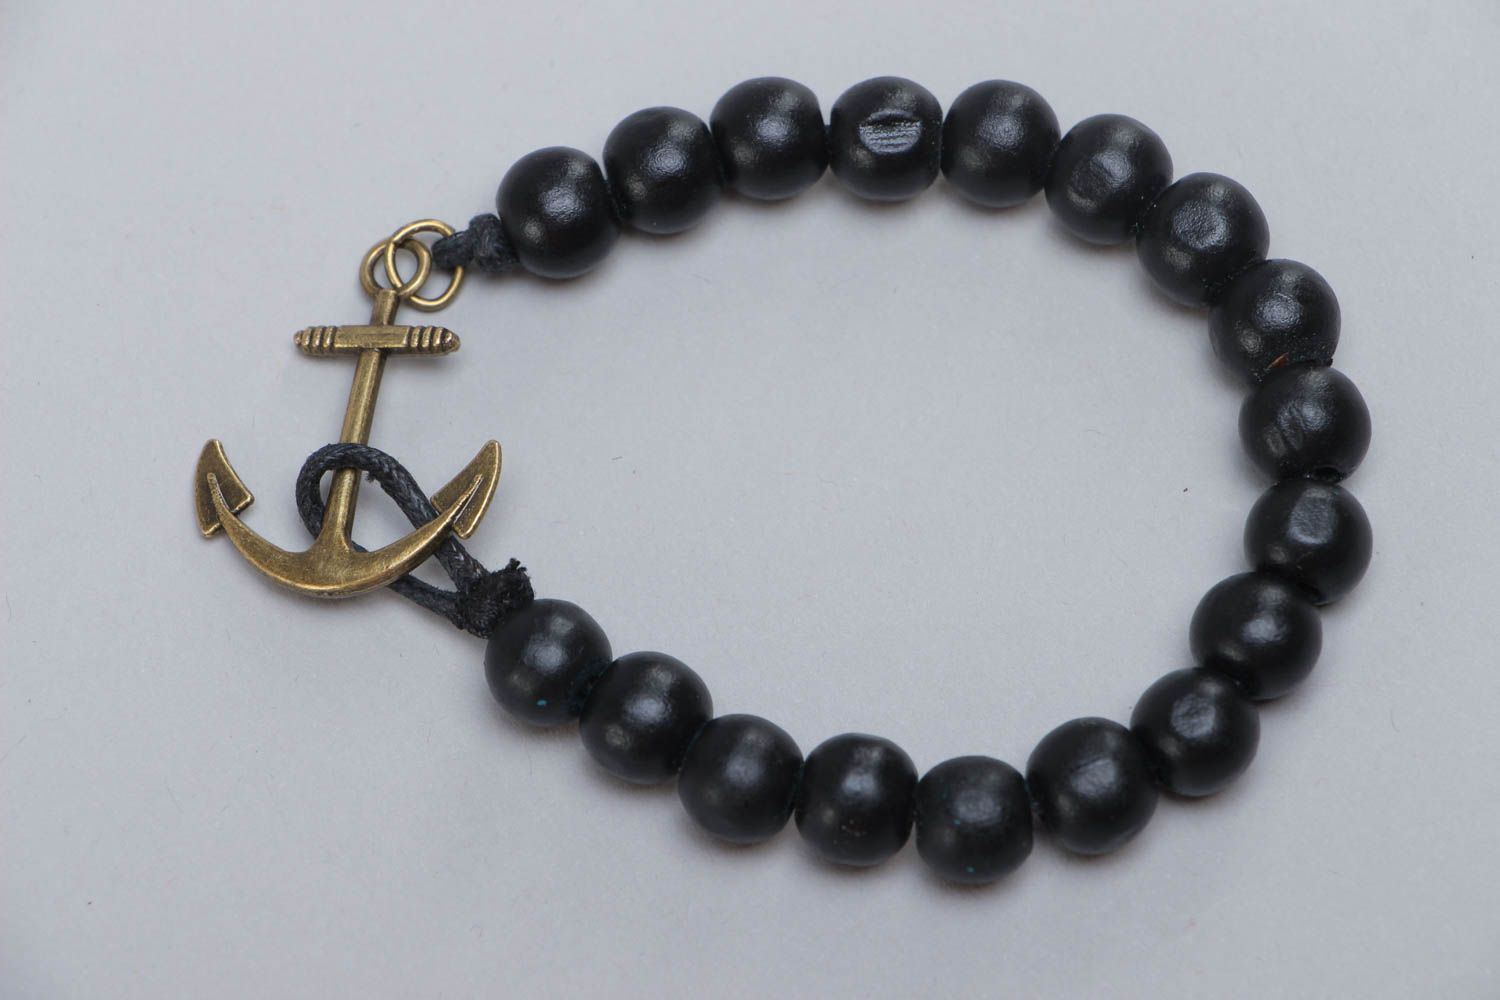 Handmade stylish black bracelet made of wooden beads with metal anchor photo 2